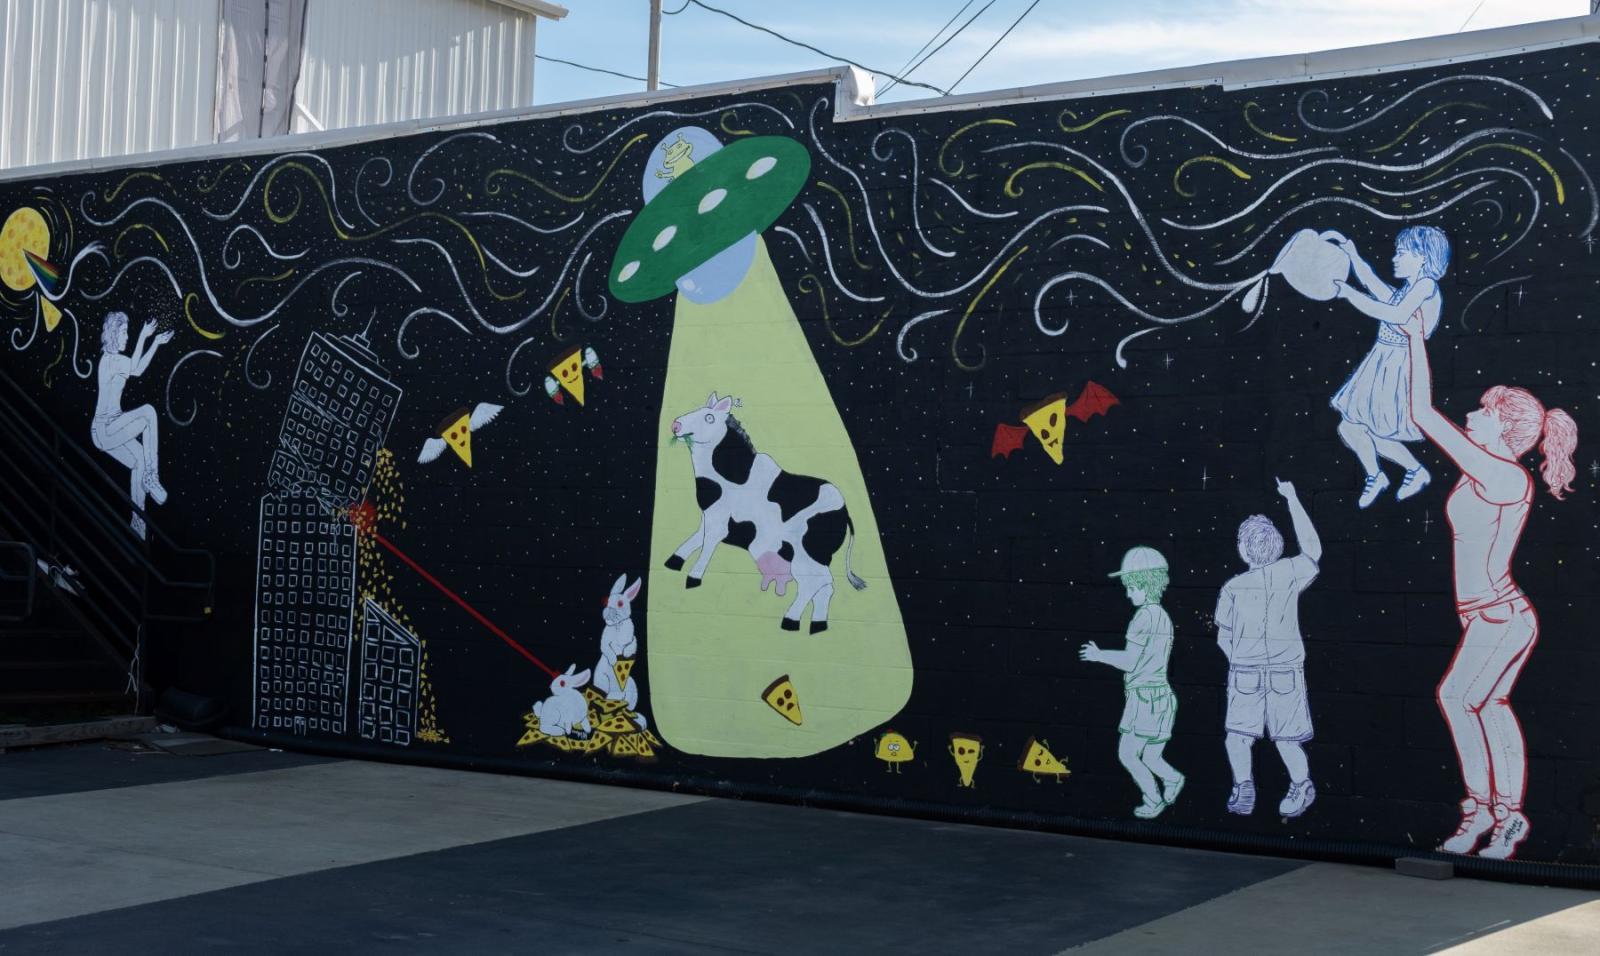 mural of space with a ufo and children playing